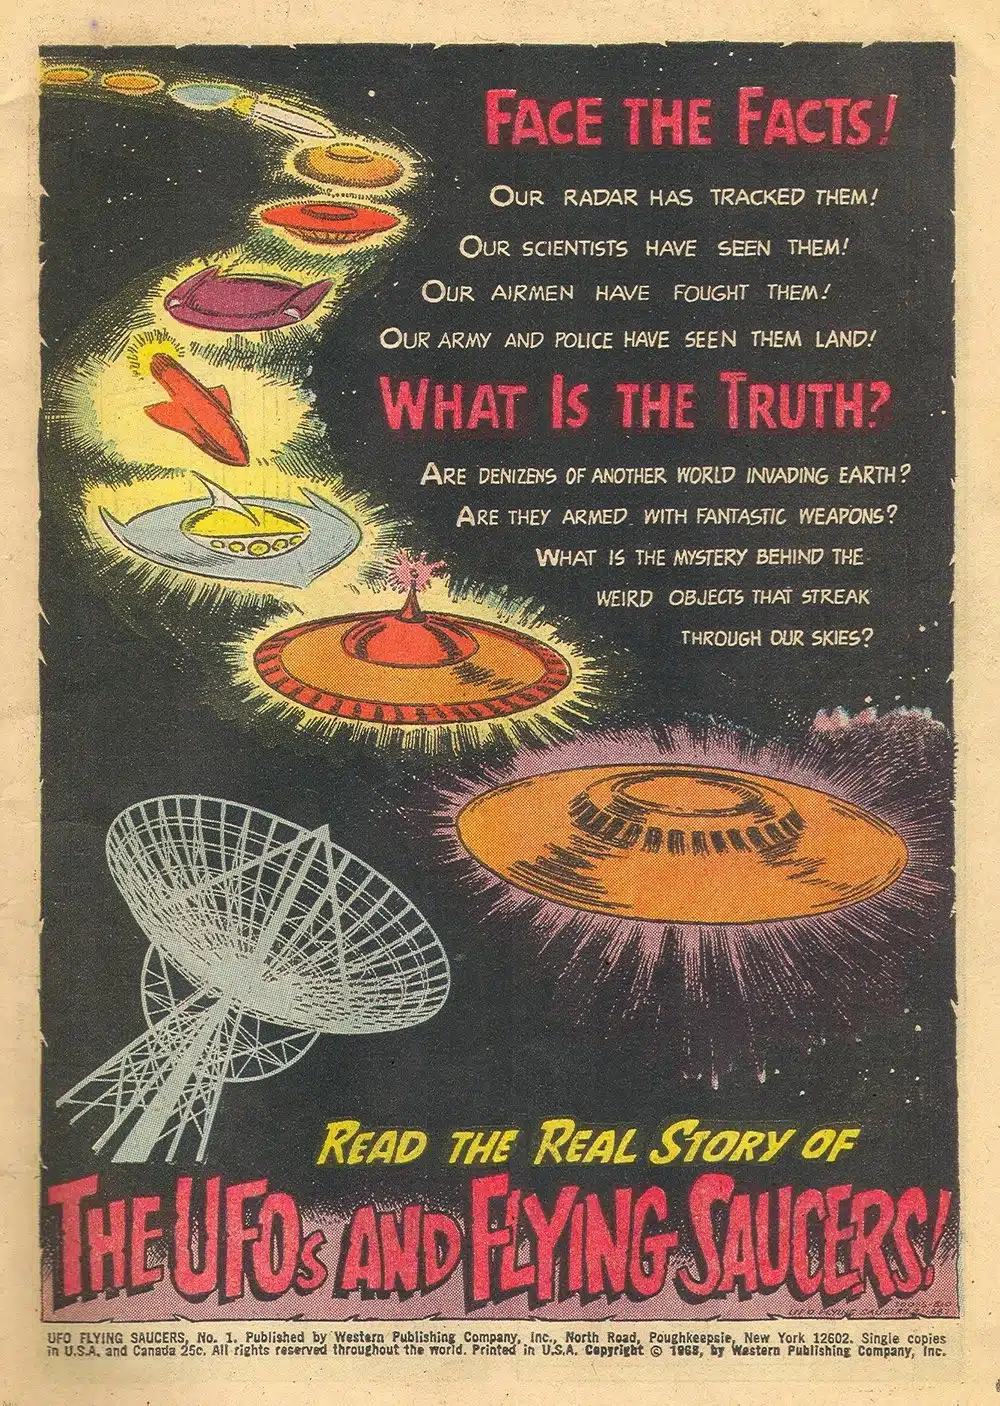 What is the truth about ufos - spacecapn blog